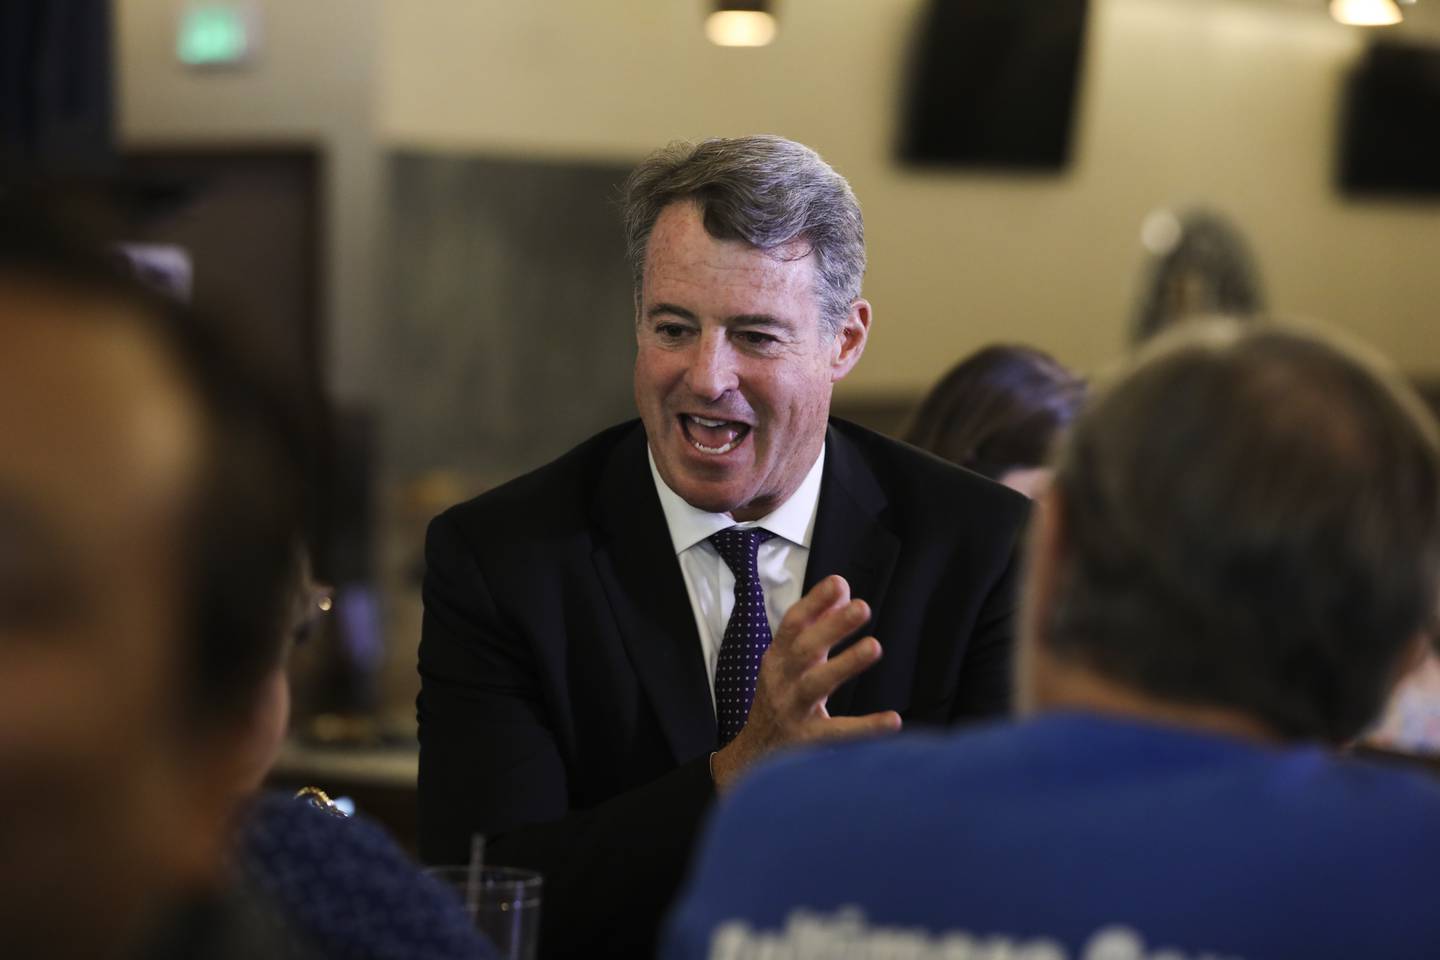 Doug Gansler, a Democratic candidate for governor, attends a forum on healthcare issues sponsored by the Maryland Democratic Party at BC Brewery on May 31, 2022. (Kaitlin Newman for The Baltimore Banner)